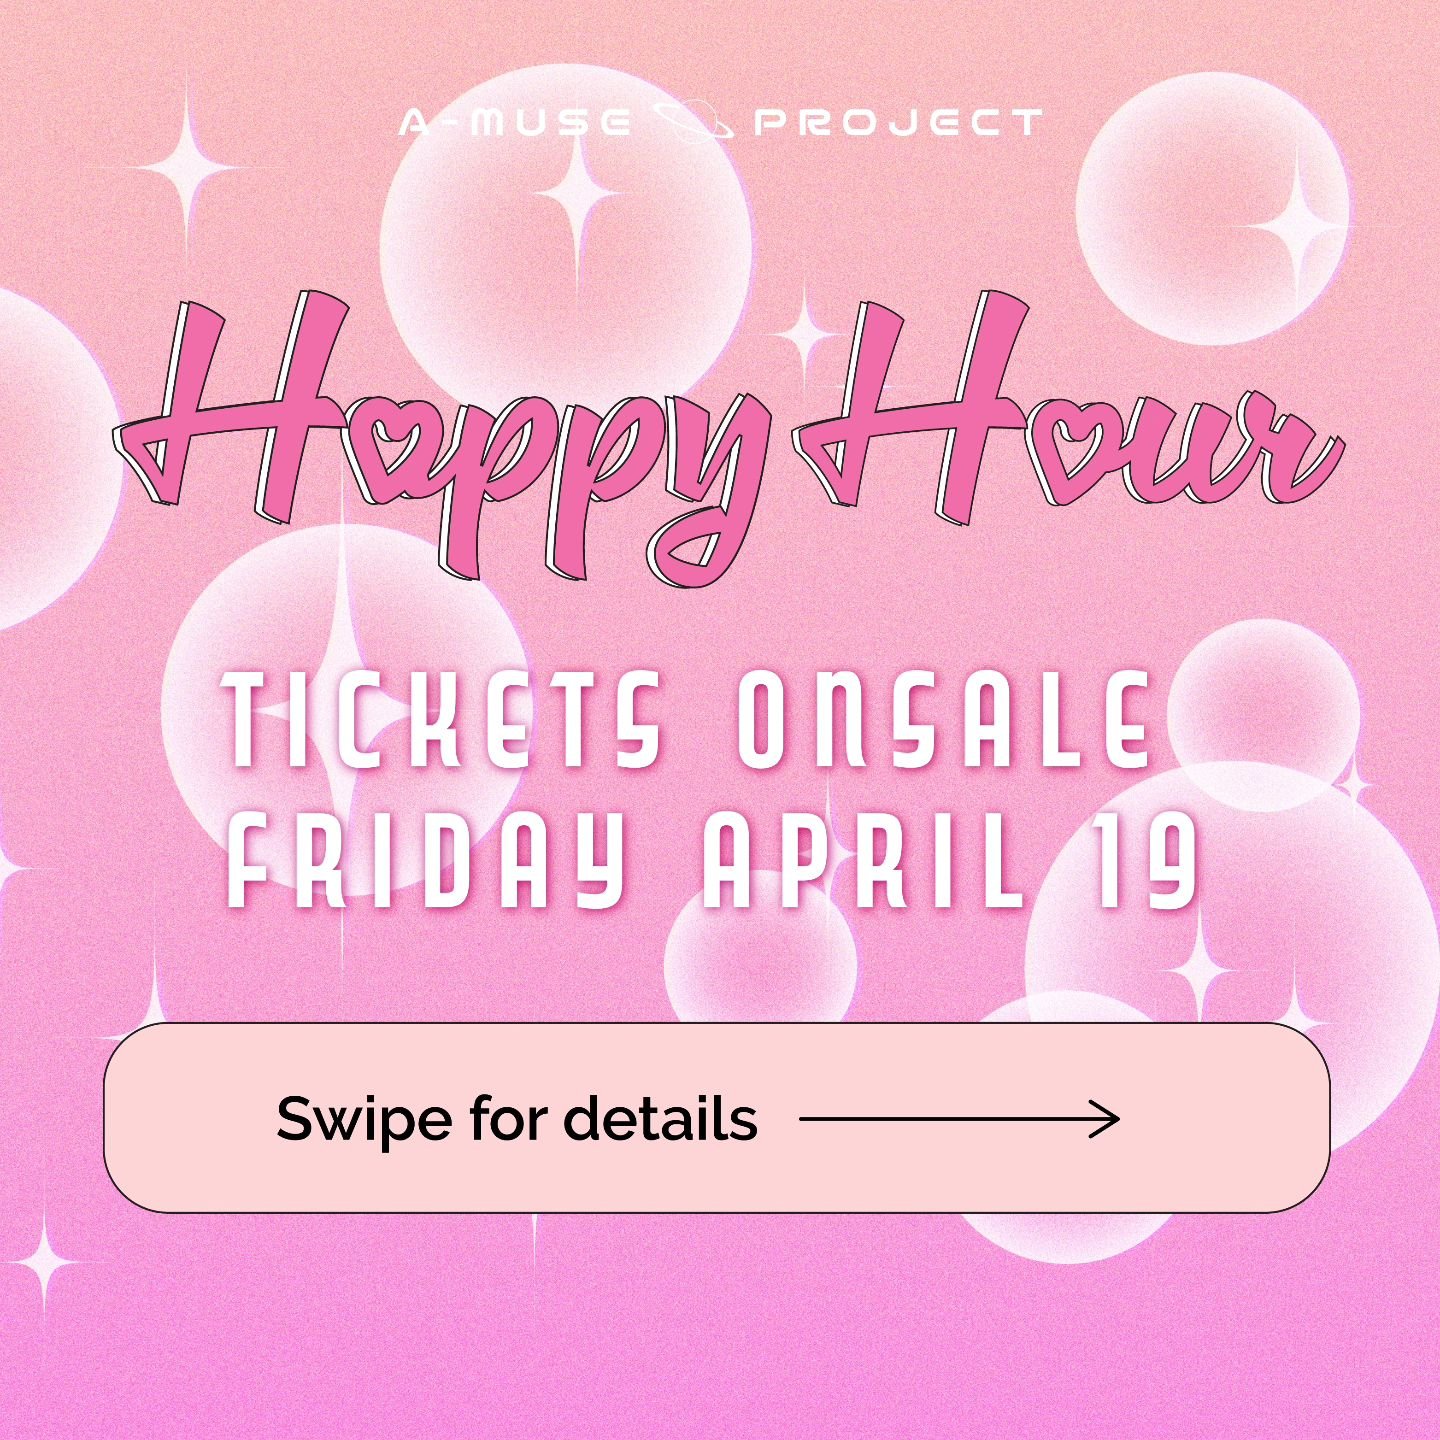 Happy Hour tickets go on sale this Friday the 19th of April at 6pm! 🌺❤️ Our party will be a unique event, so make sure to check out our ticket listing to discover how you can celebrate with us! Limited VIP tickets available 🍻 don't miss out! 
#idol